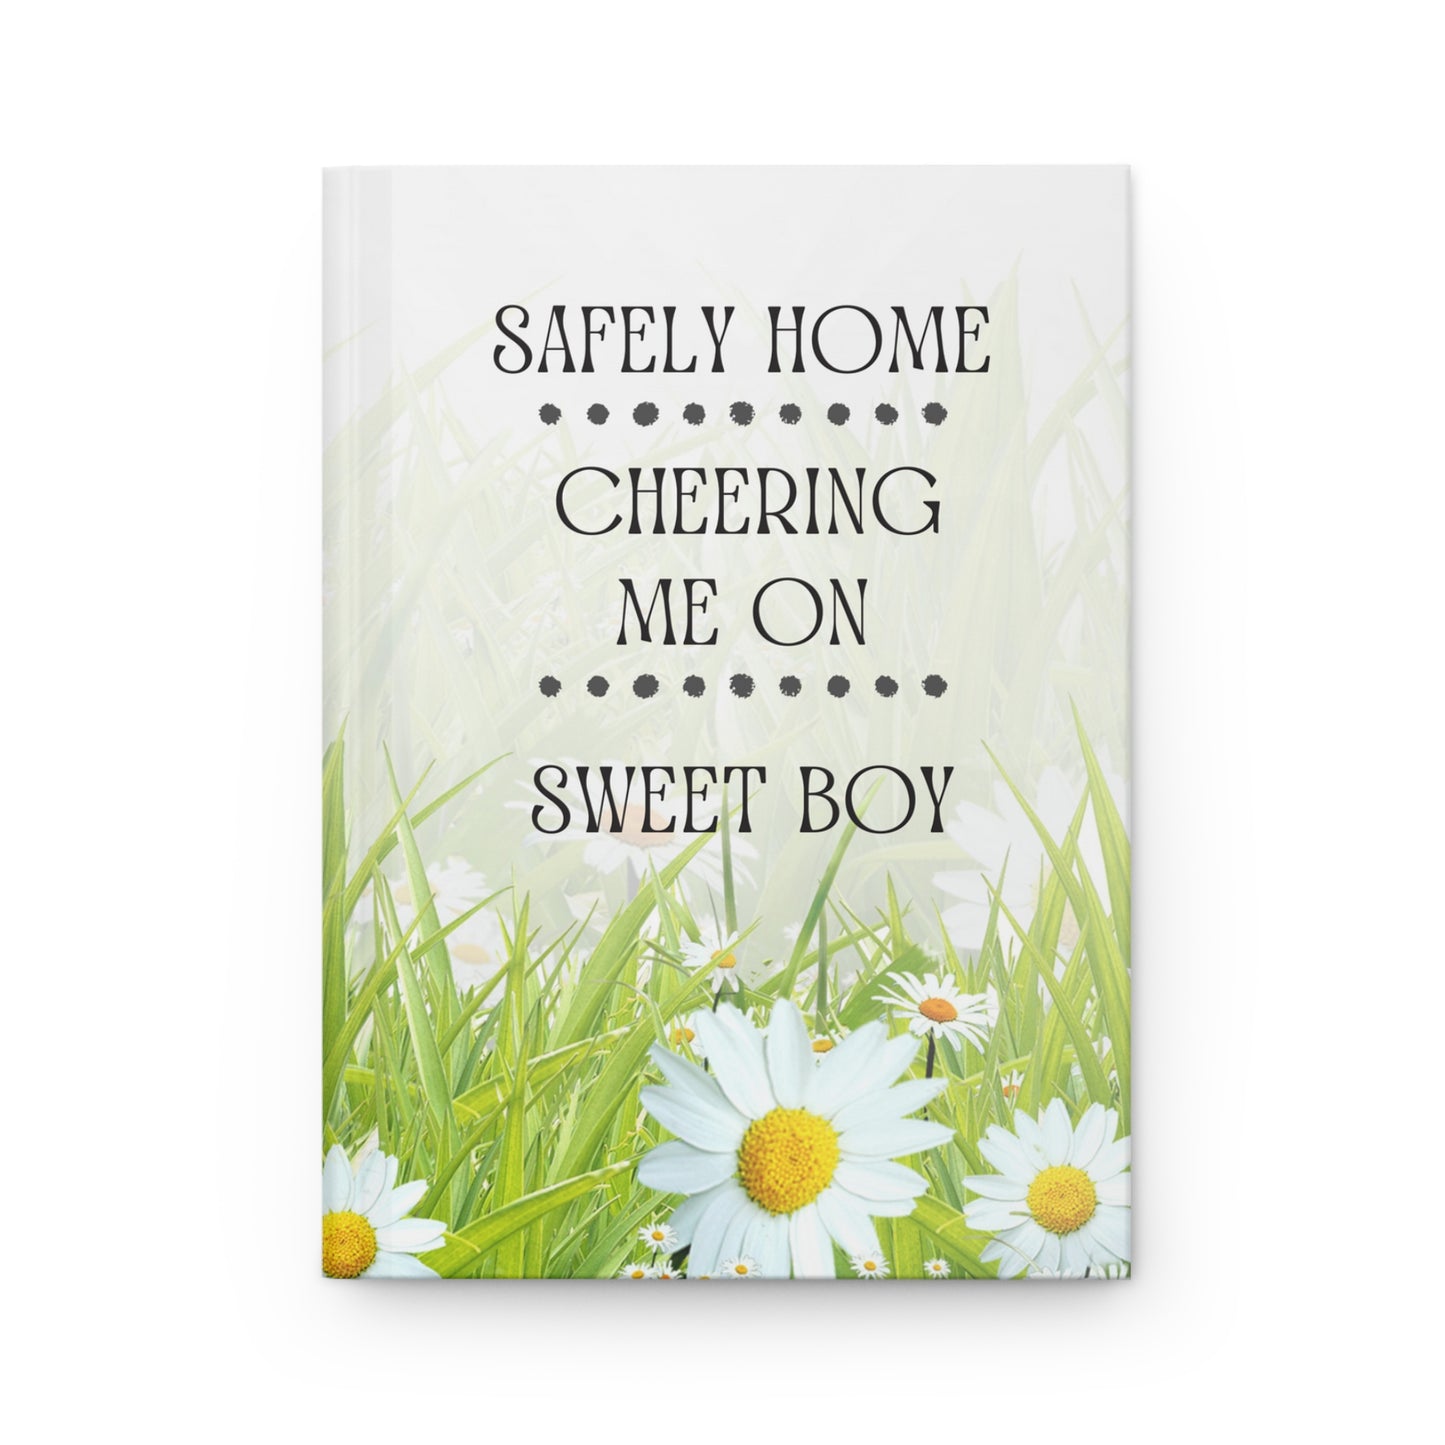 Grief Journal for Loss of Son, Grandson, Nephew, Loved One, Safely Home Cheering Me On